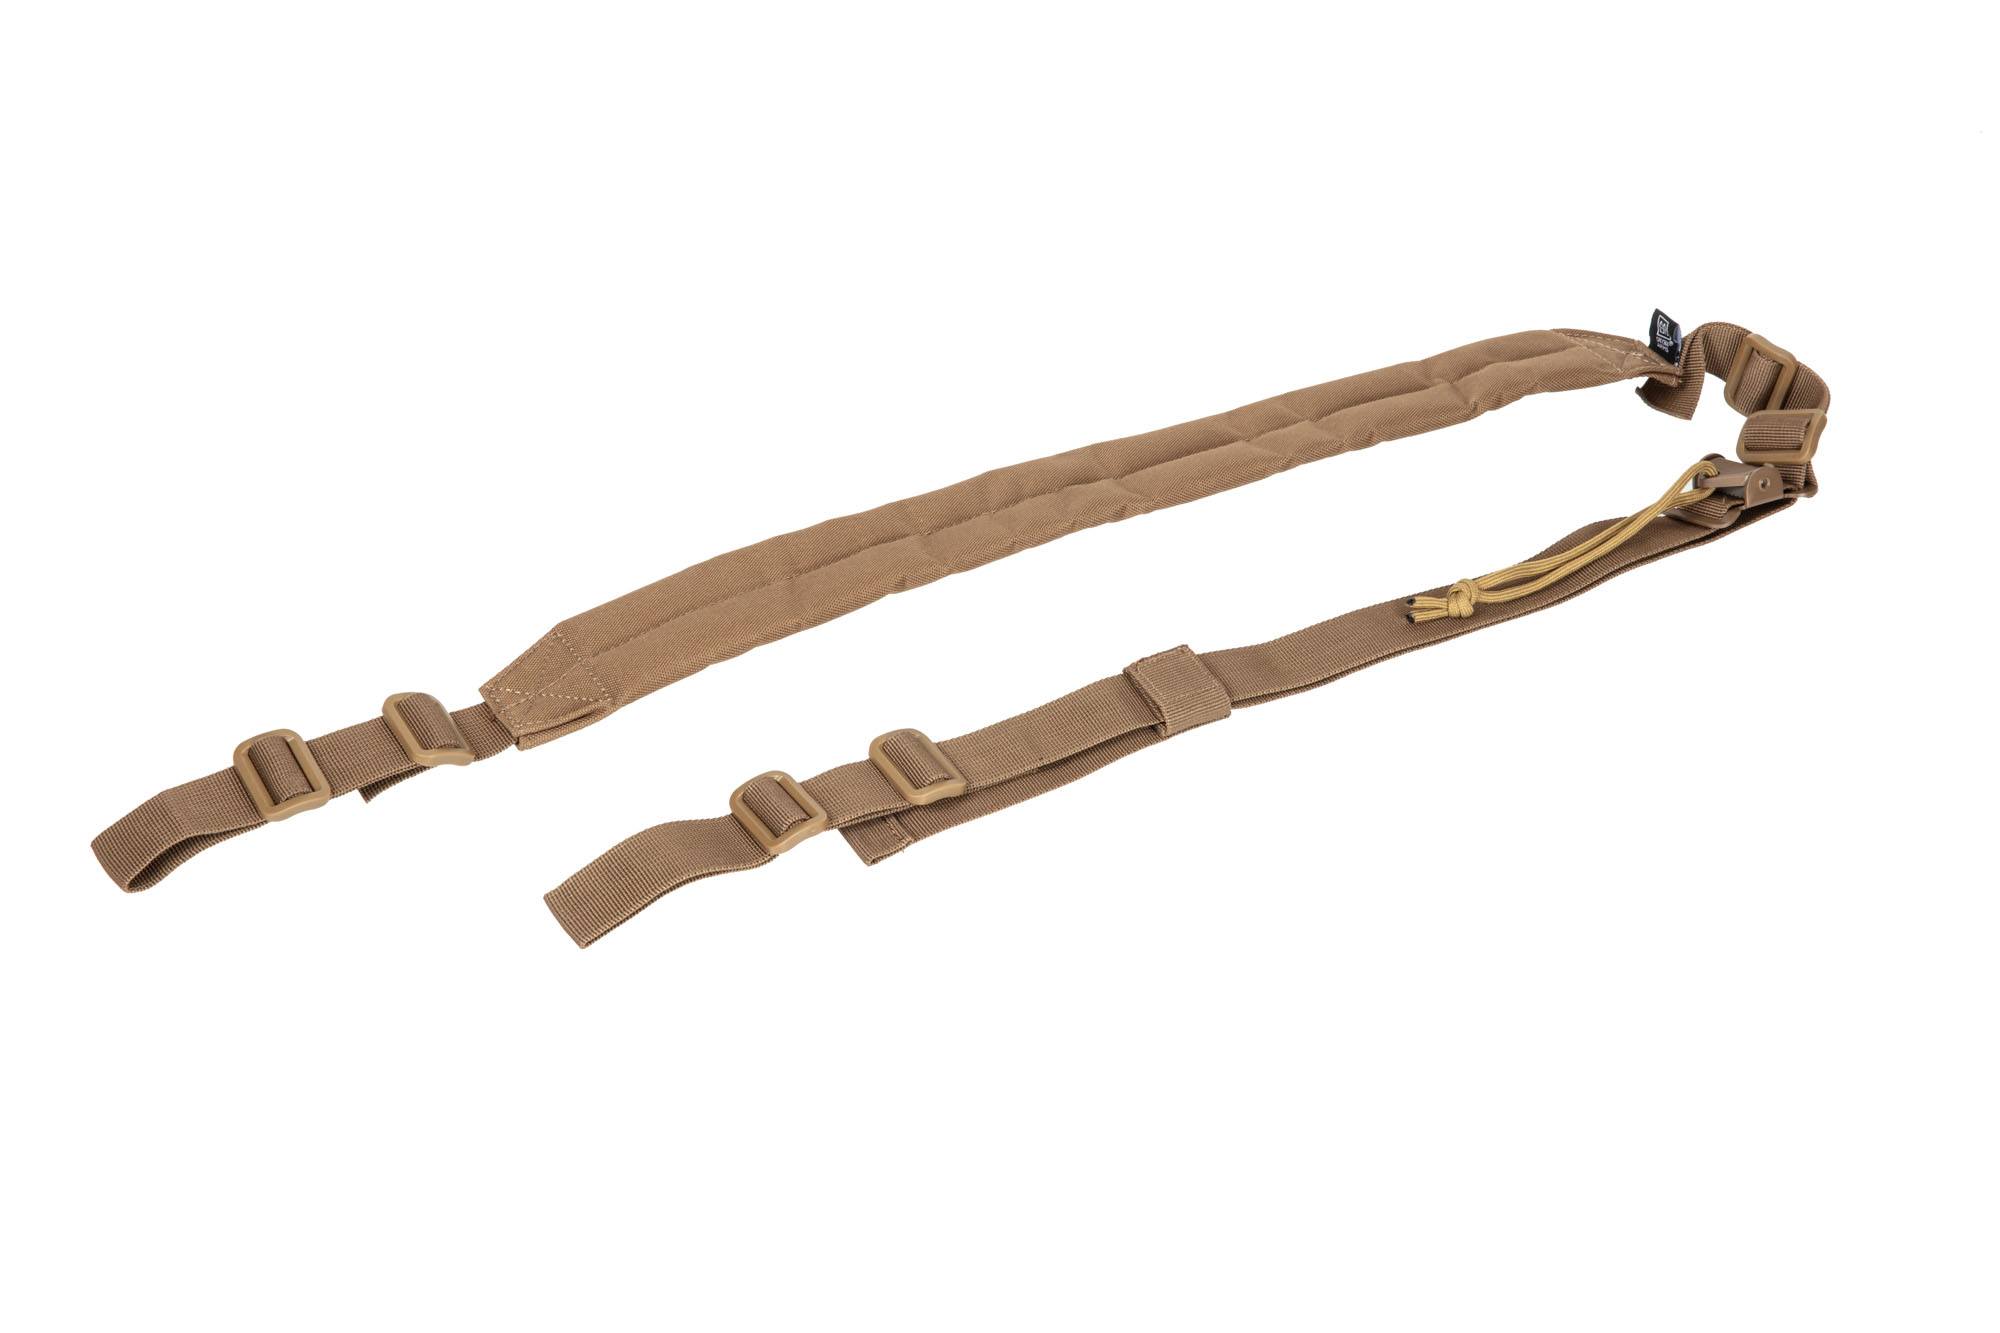 Specna Arms I Two-Point Tactical Sling - Tan